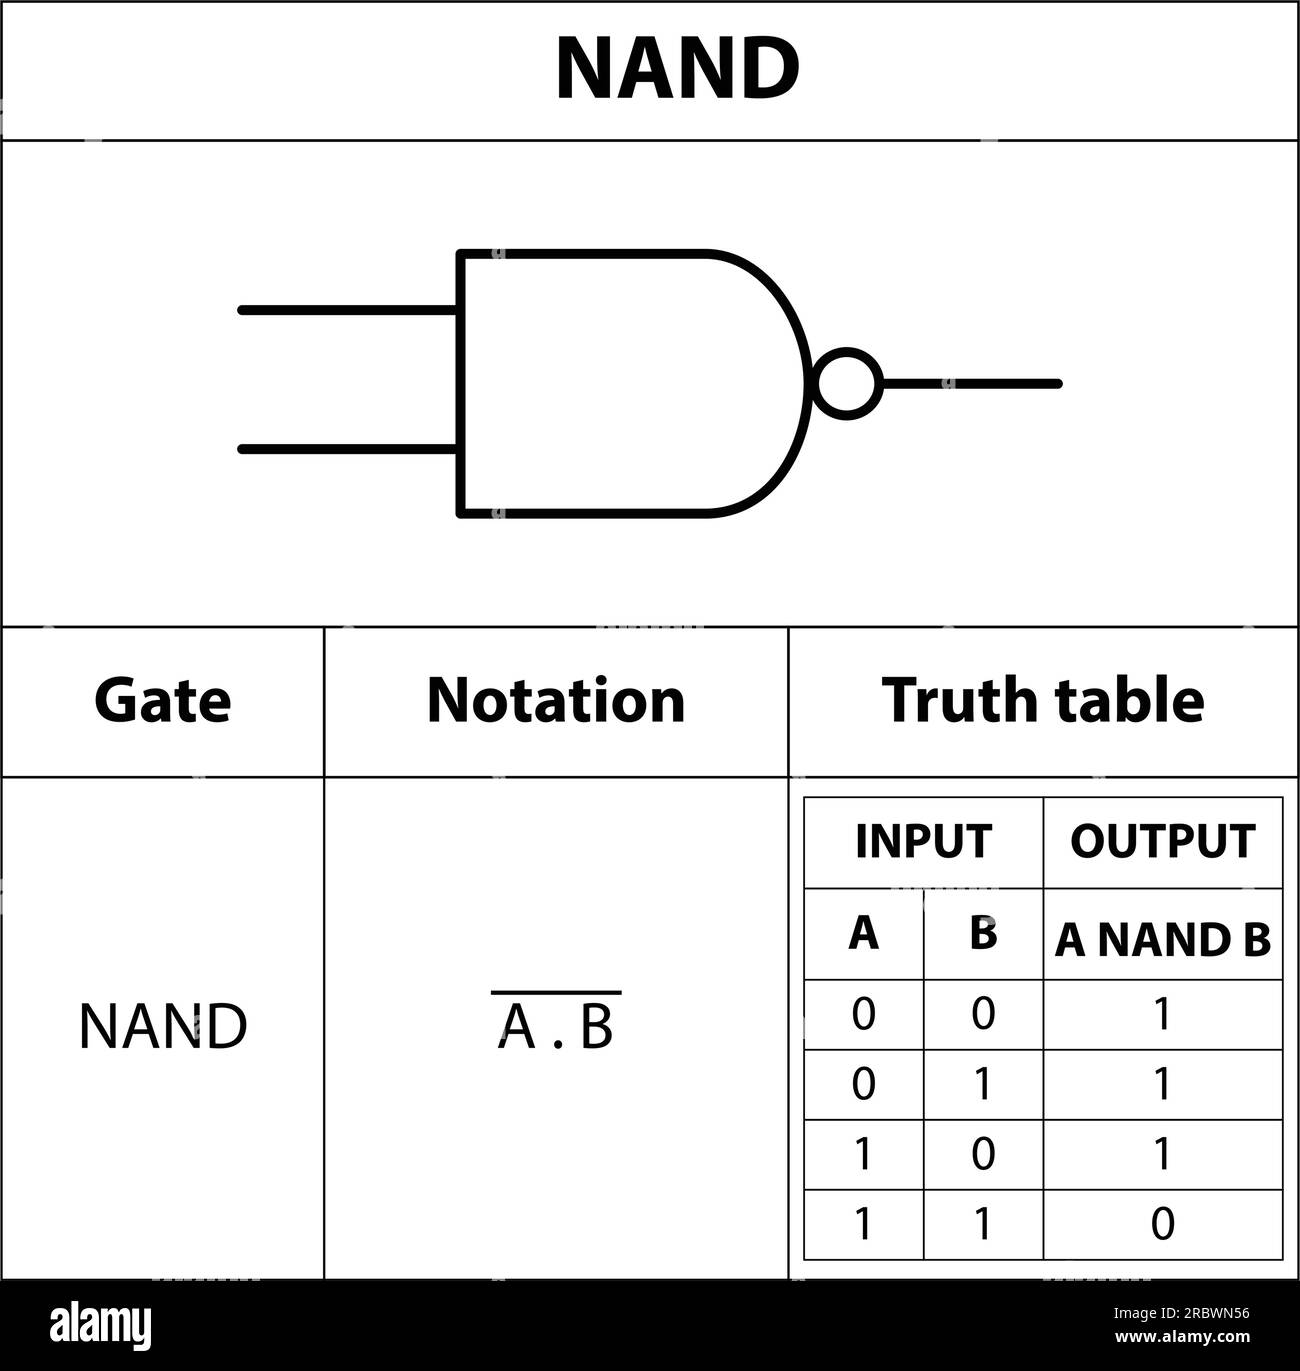 NAND Gate. electronic symbol of open switch Illustration of basic circuit symbols. Electrical symbols, study content of physics students.  electrical Stock Vector